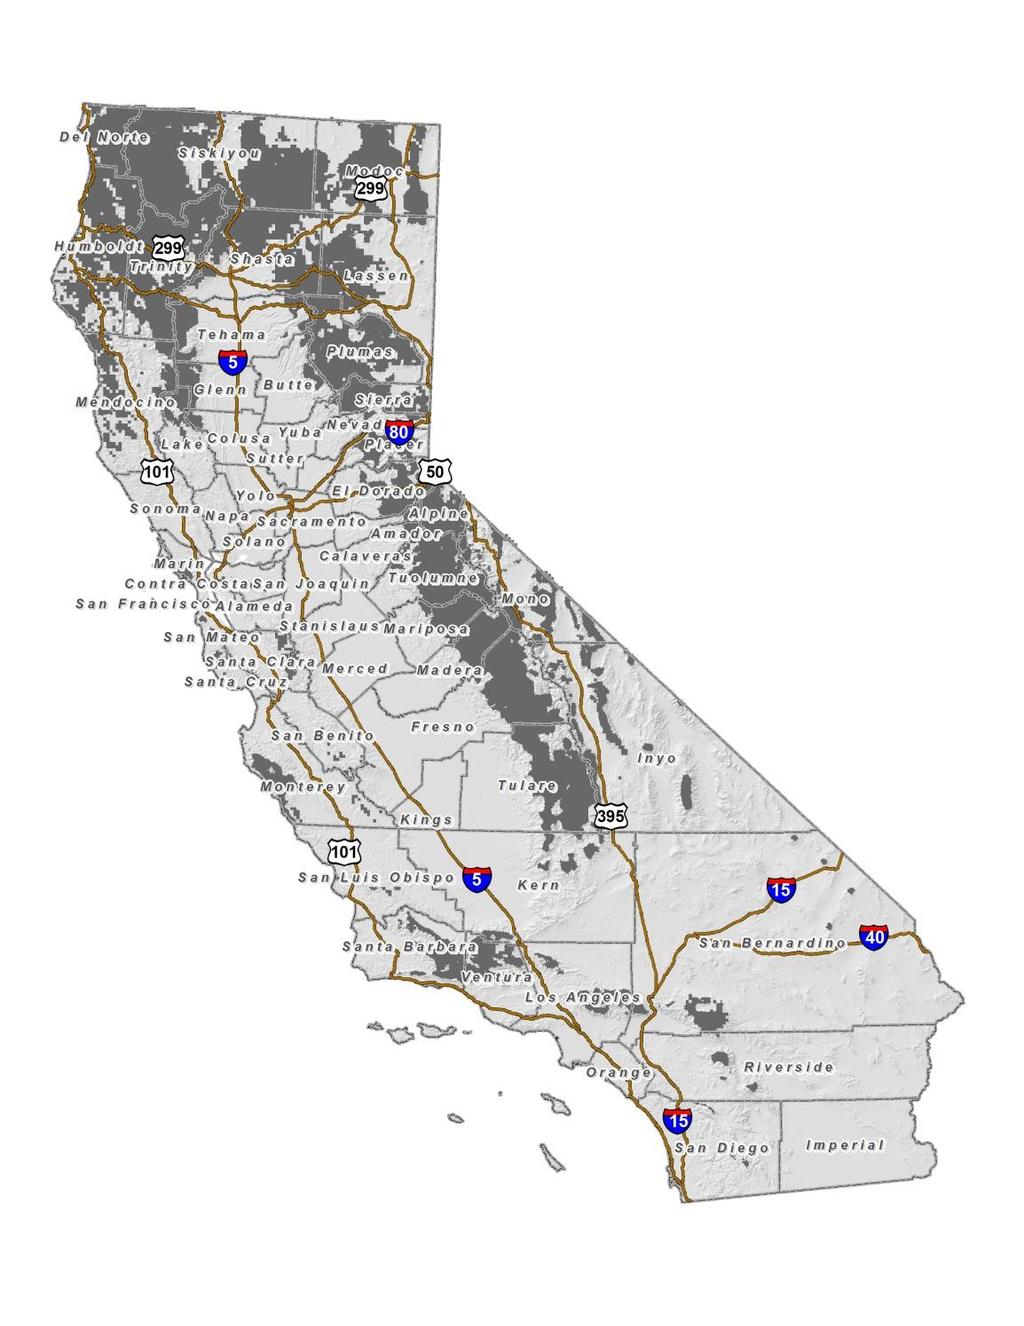 Figure 9.2. Potentially suitable habitat for wolves in California delineated in dark gray. Model is based on habitat used by wolves in the northern Rocky Mountains states.